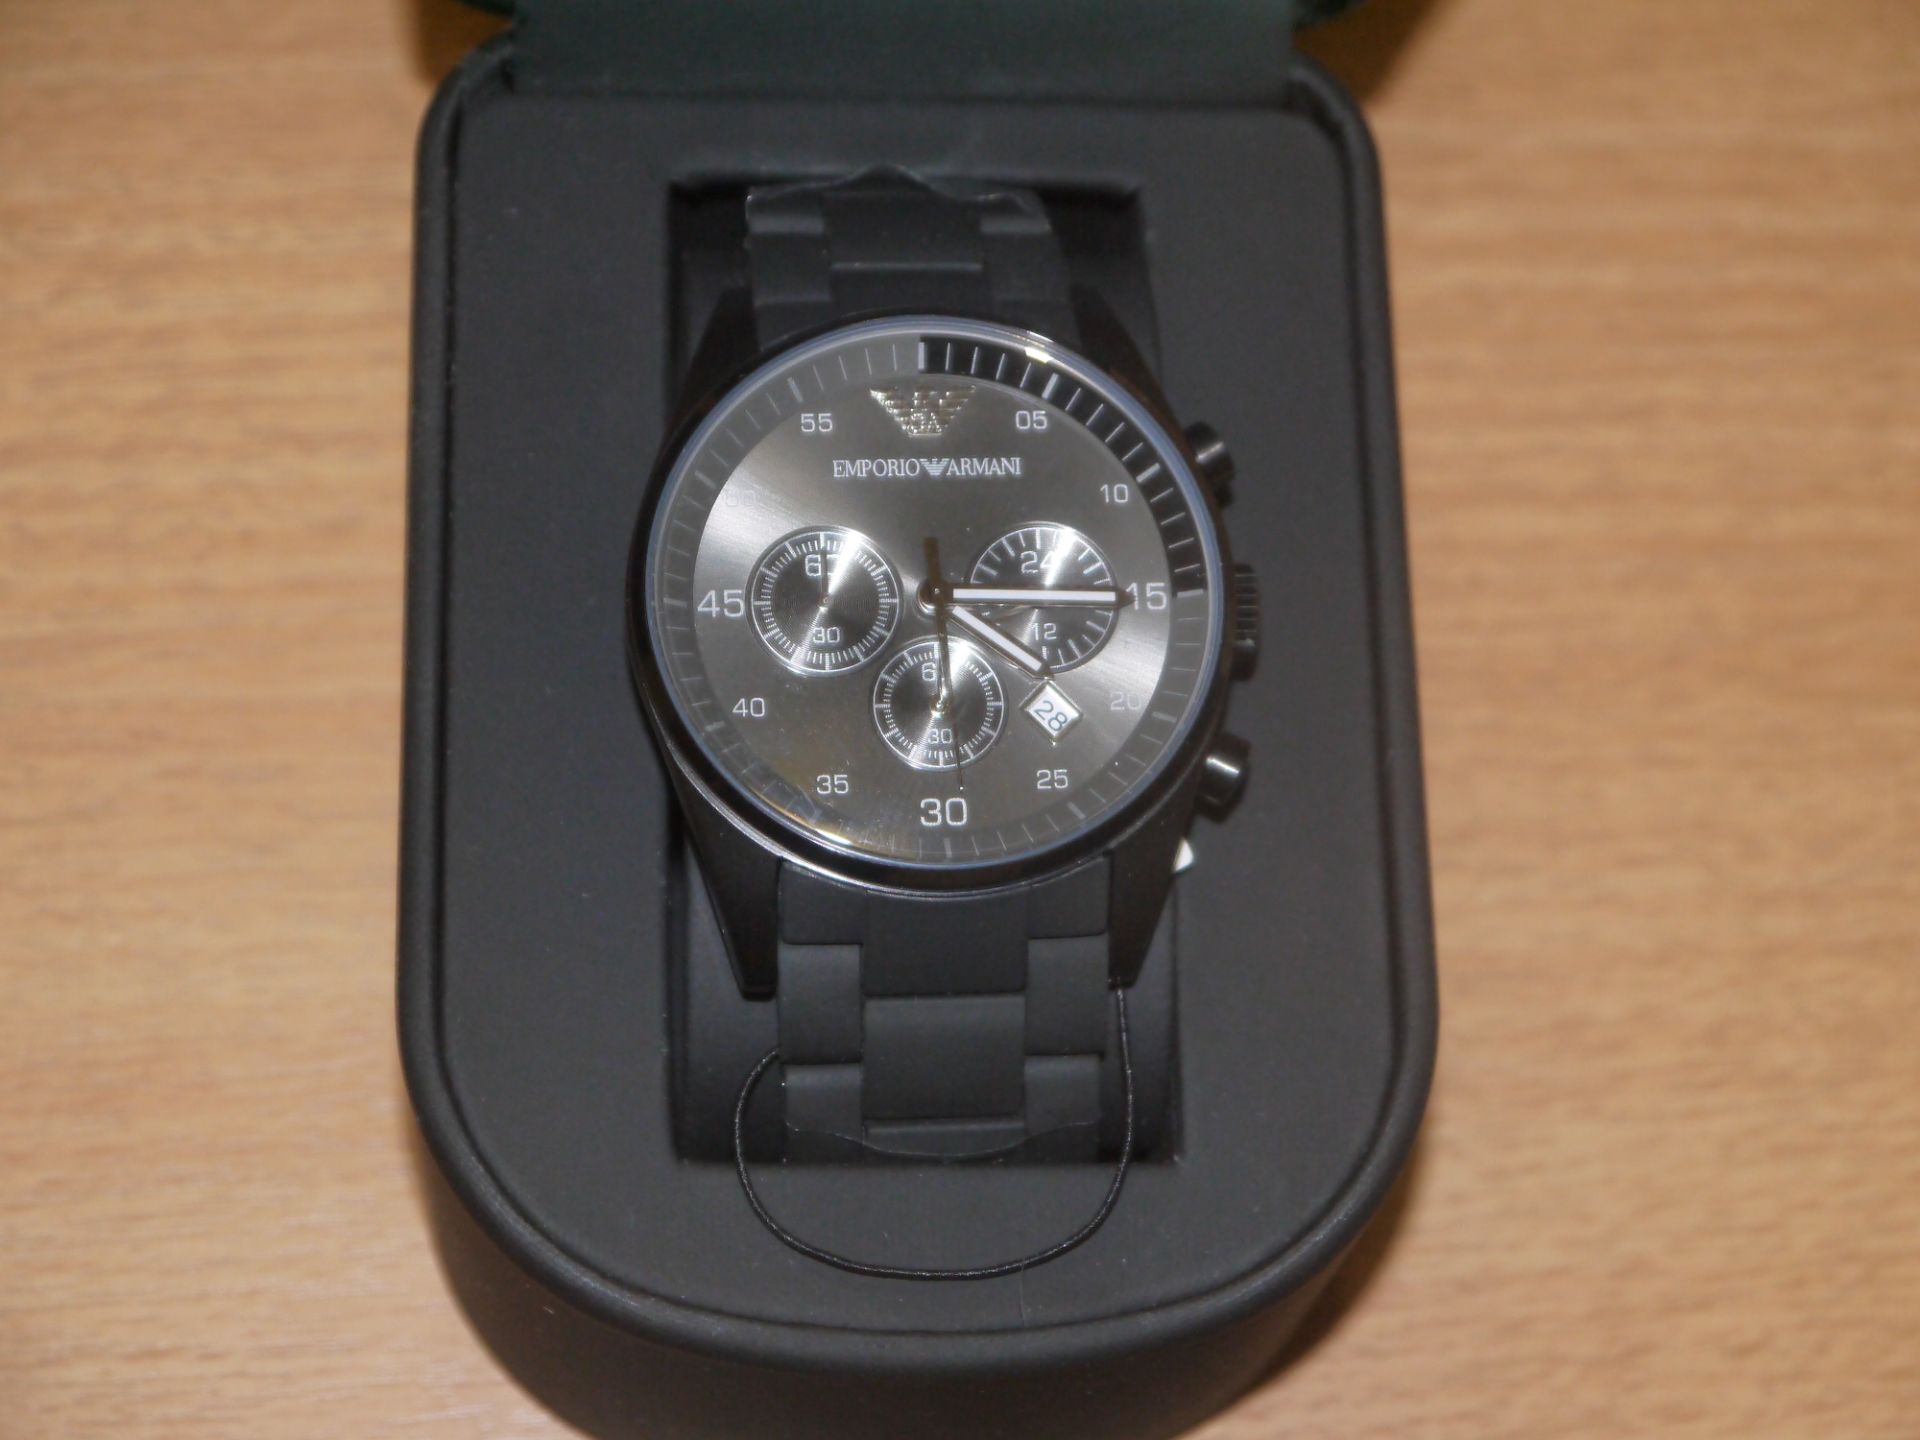 NO VAT!! Armani AR5889 Chronograph Gents Watch. New, boxed and ticking. RRP £341.00. See link.